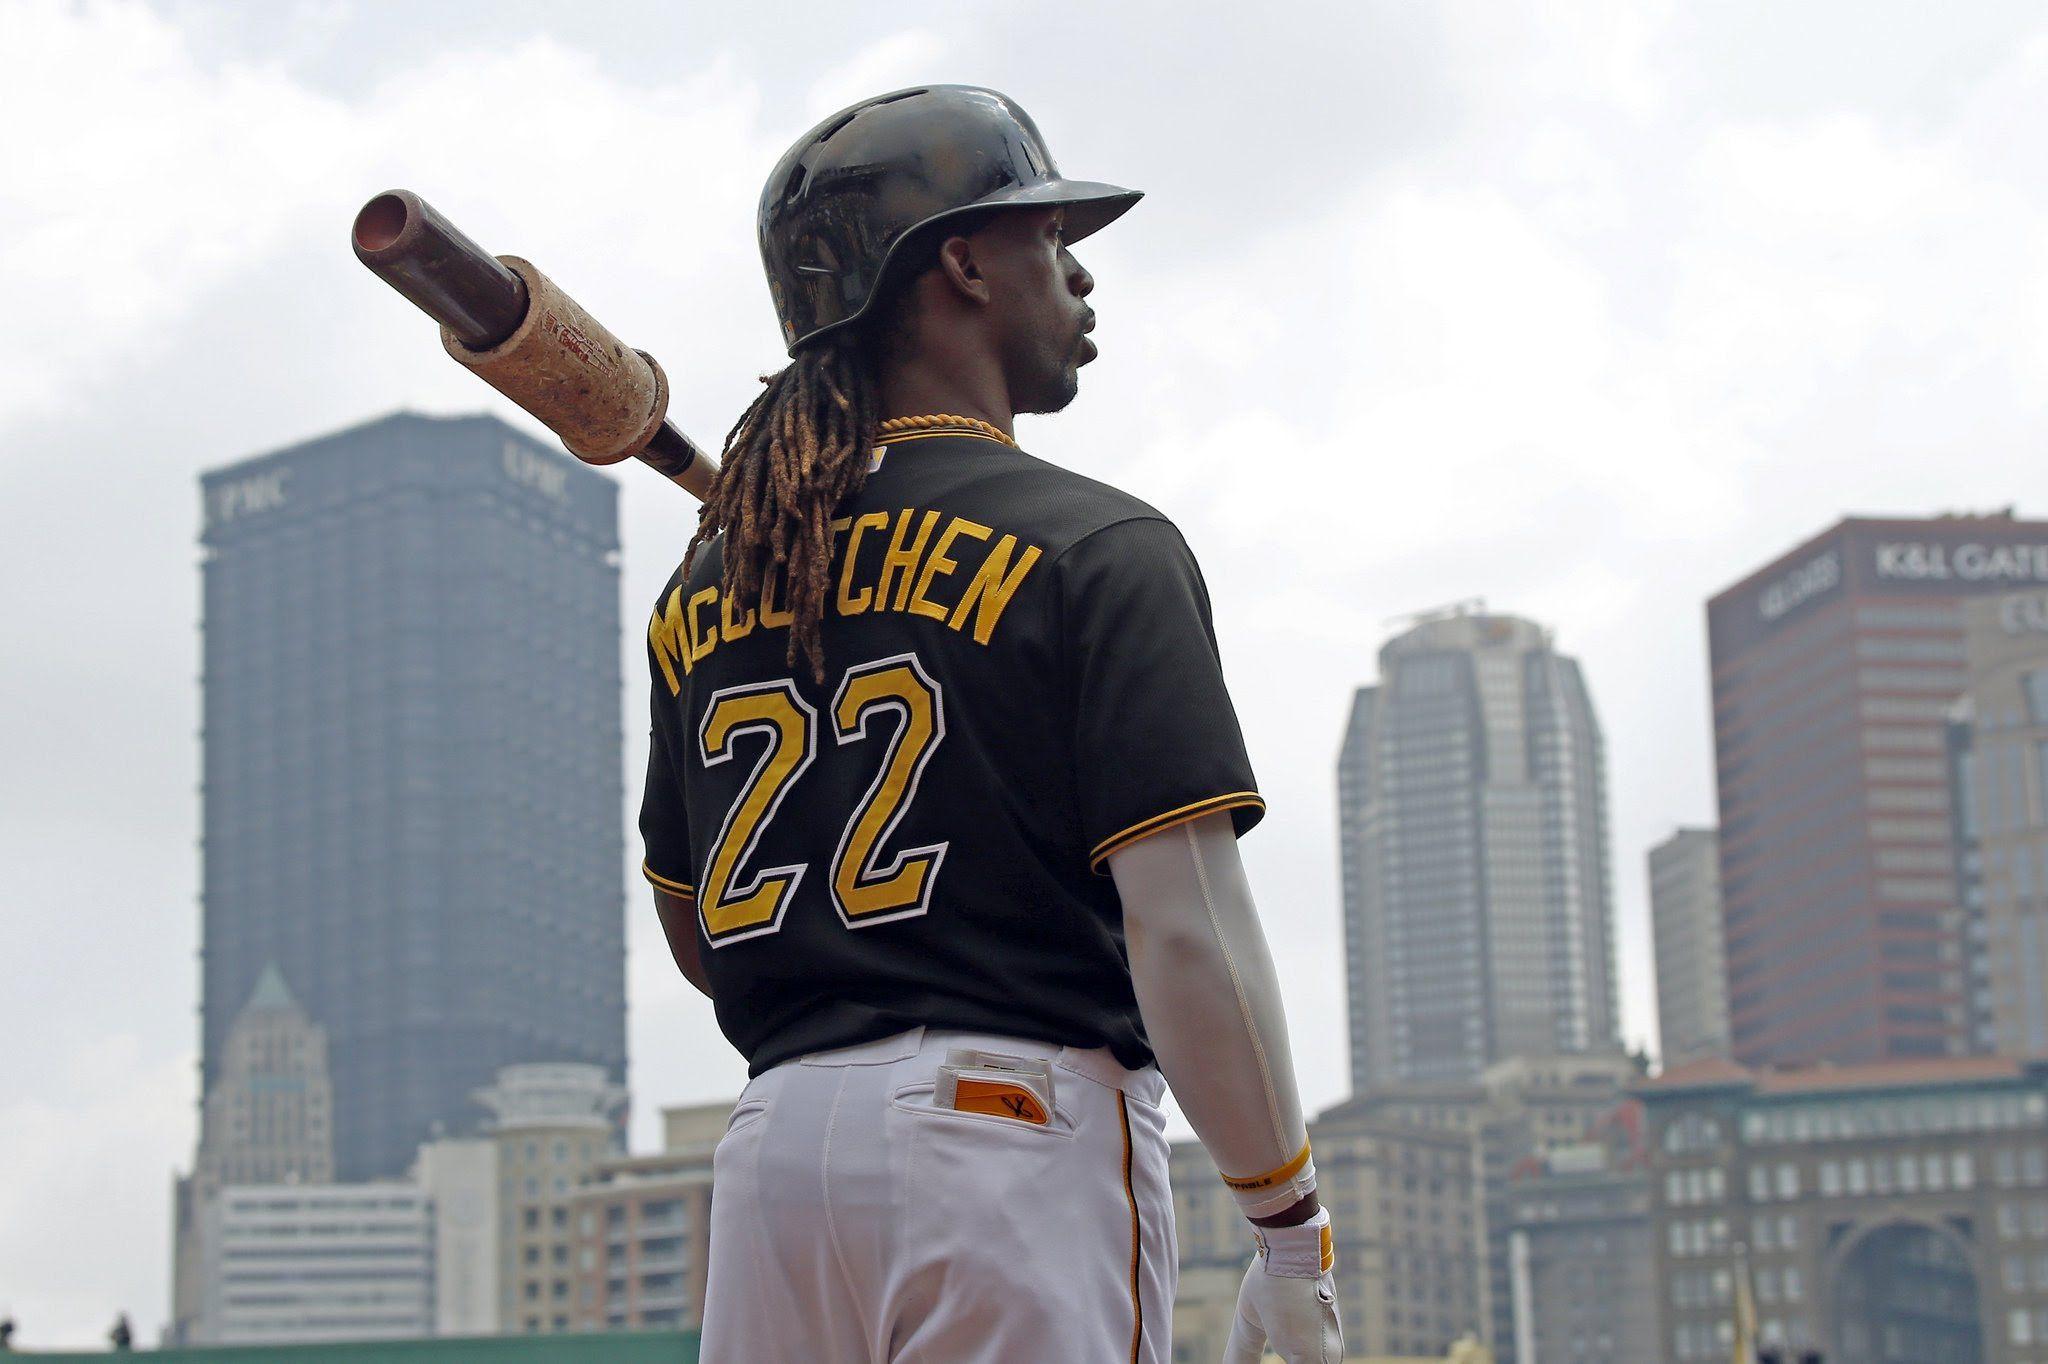 SportsBlog - The African American Athlete - McCutchen Delights Two